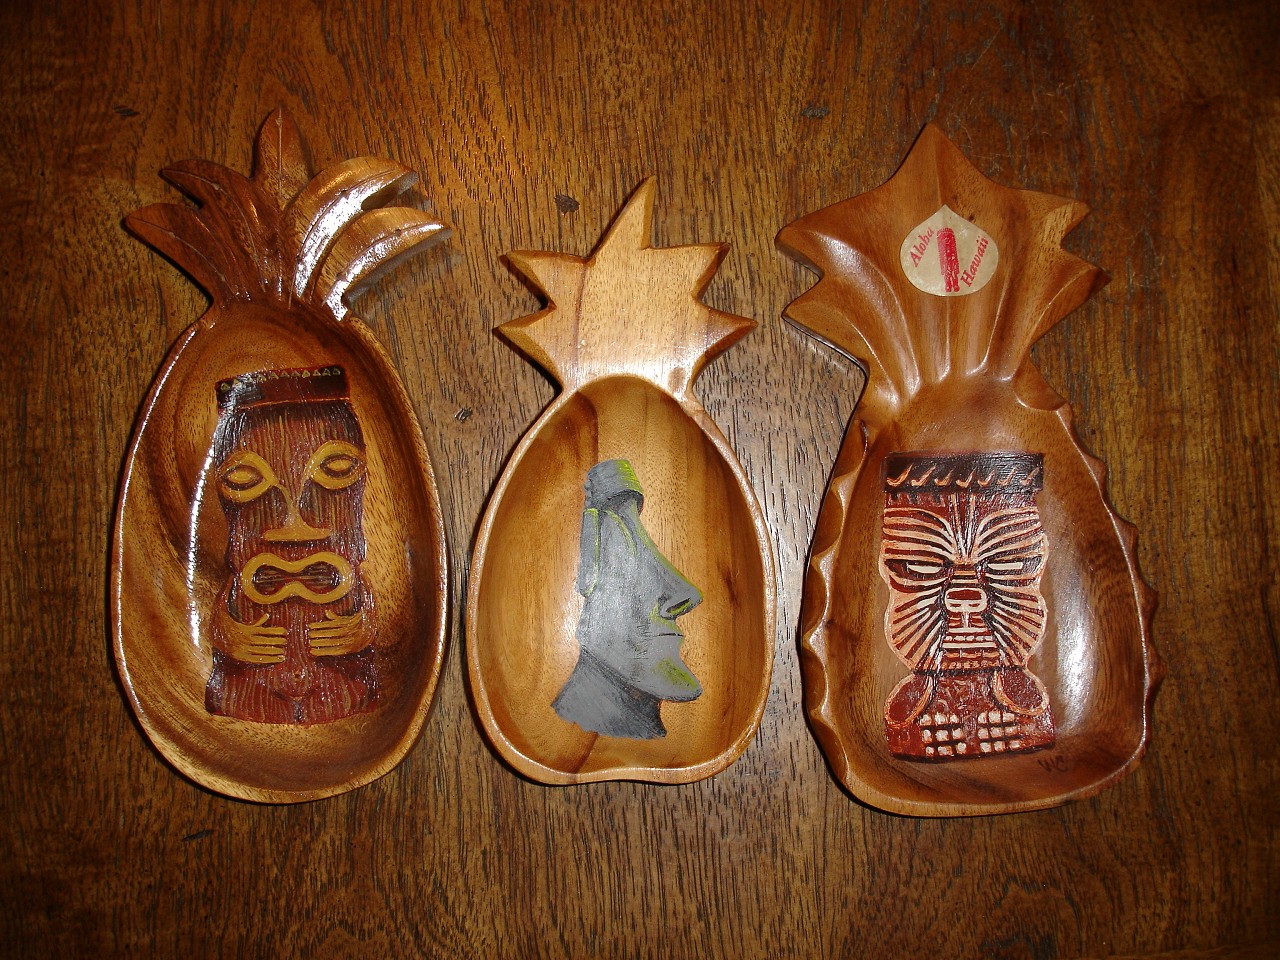 Painting on wooden Pineapple bowls (5)